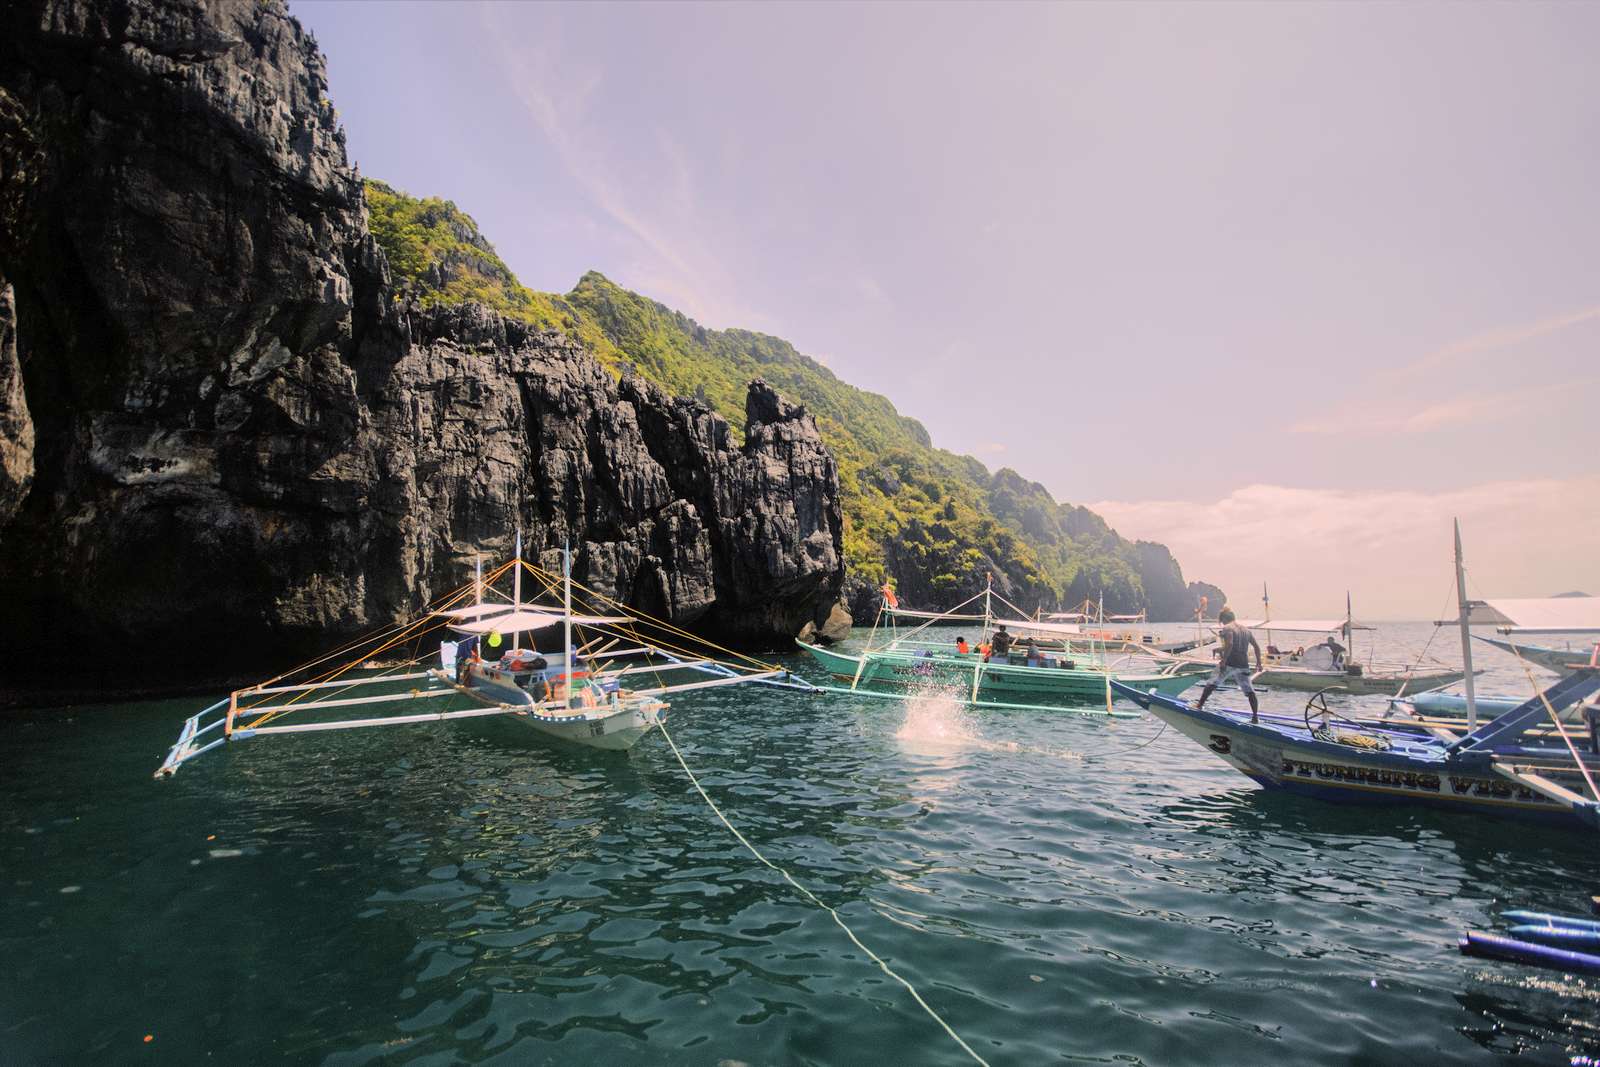 Bancas jockeying for position by the entrance to the Secret Beach, El Nido